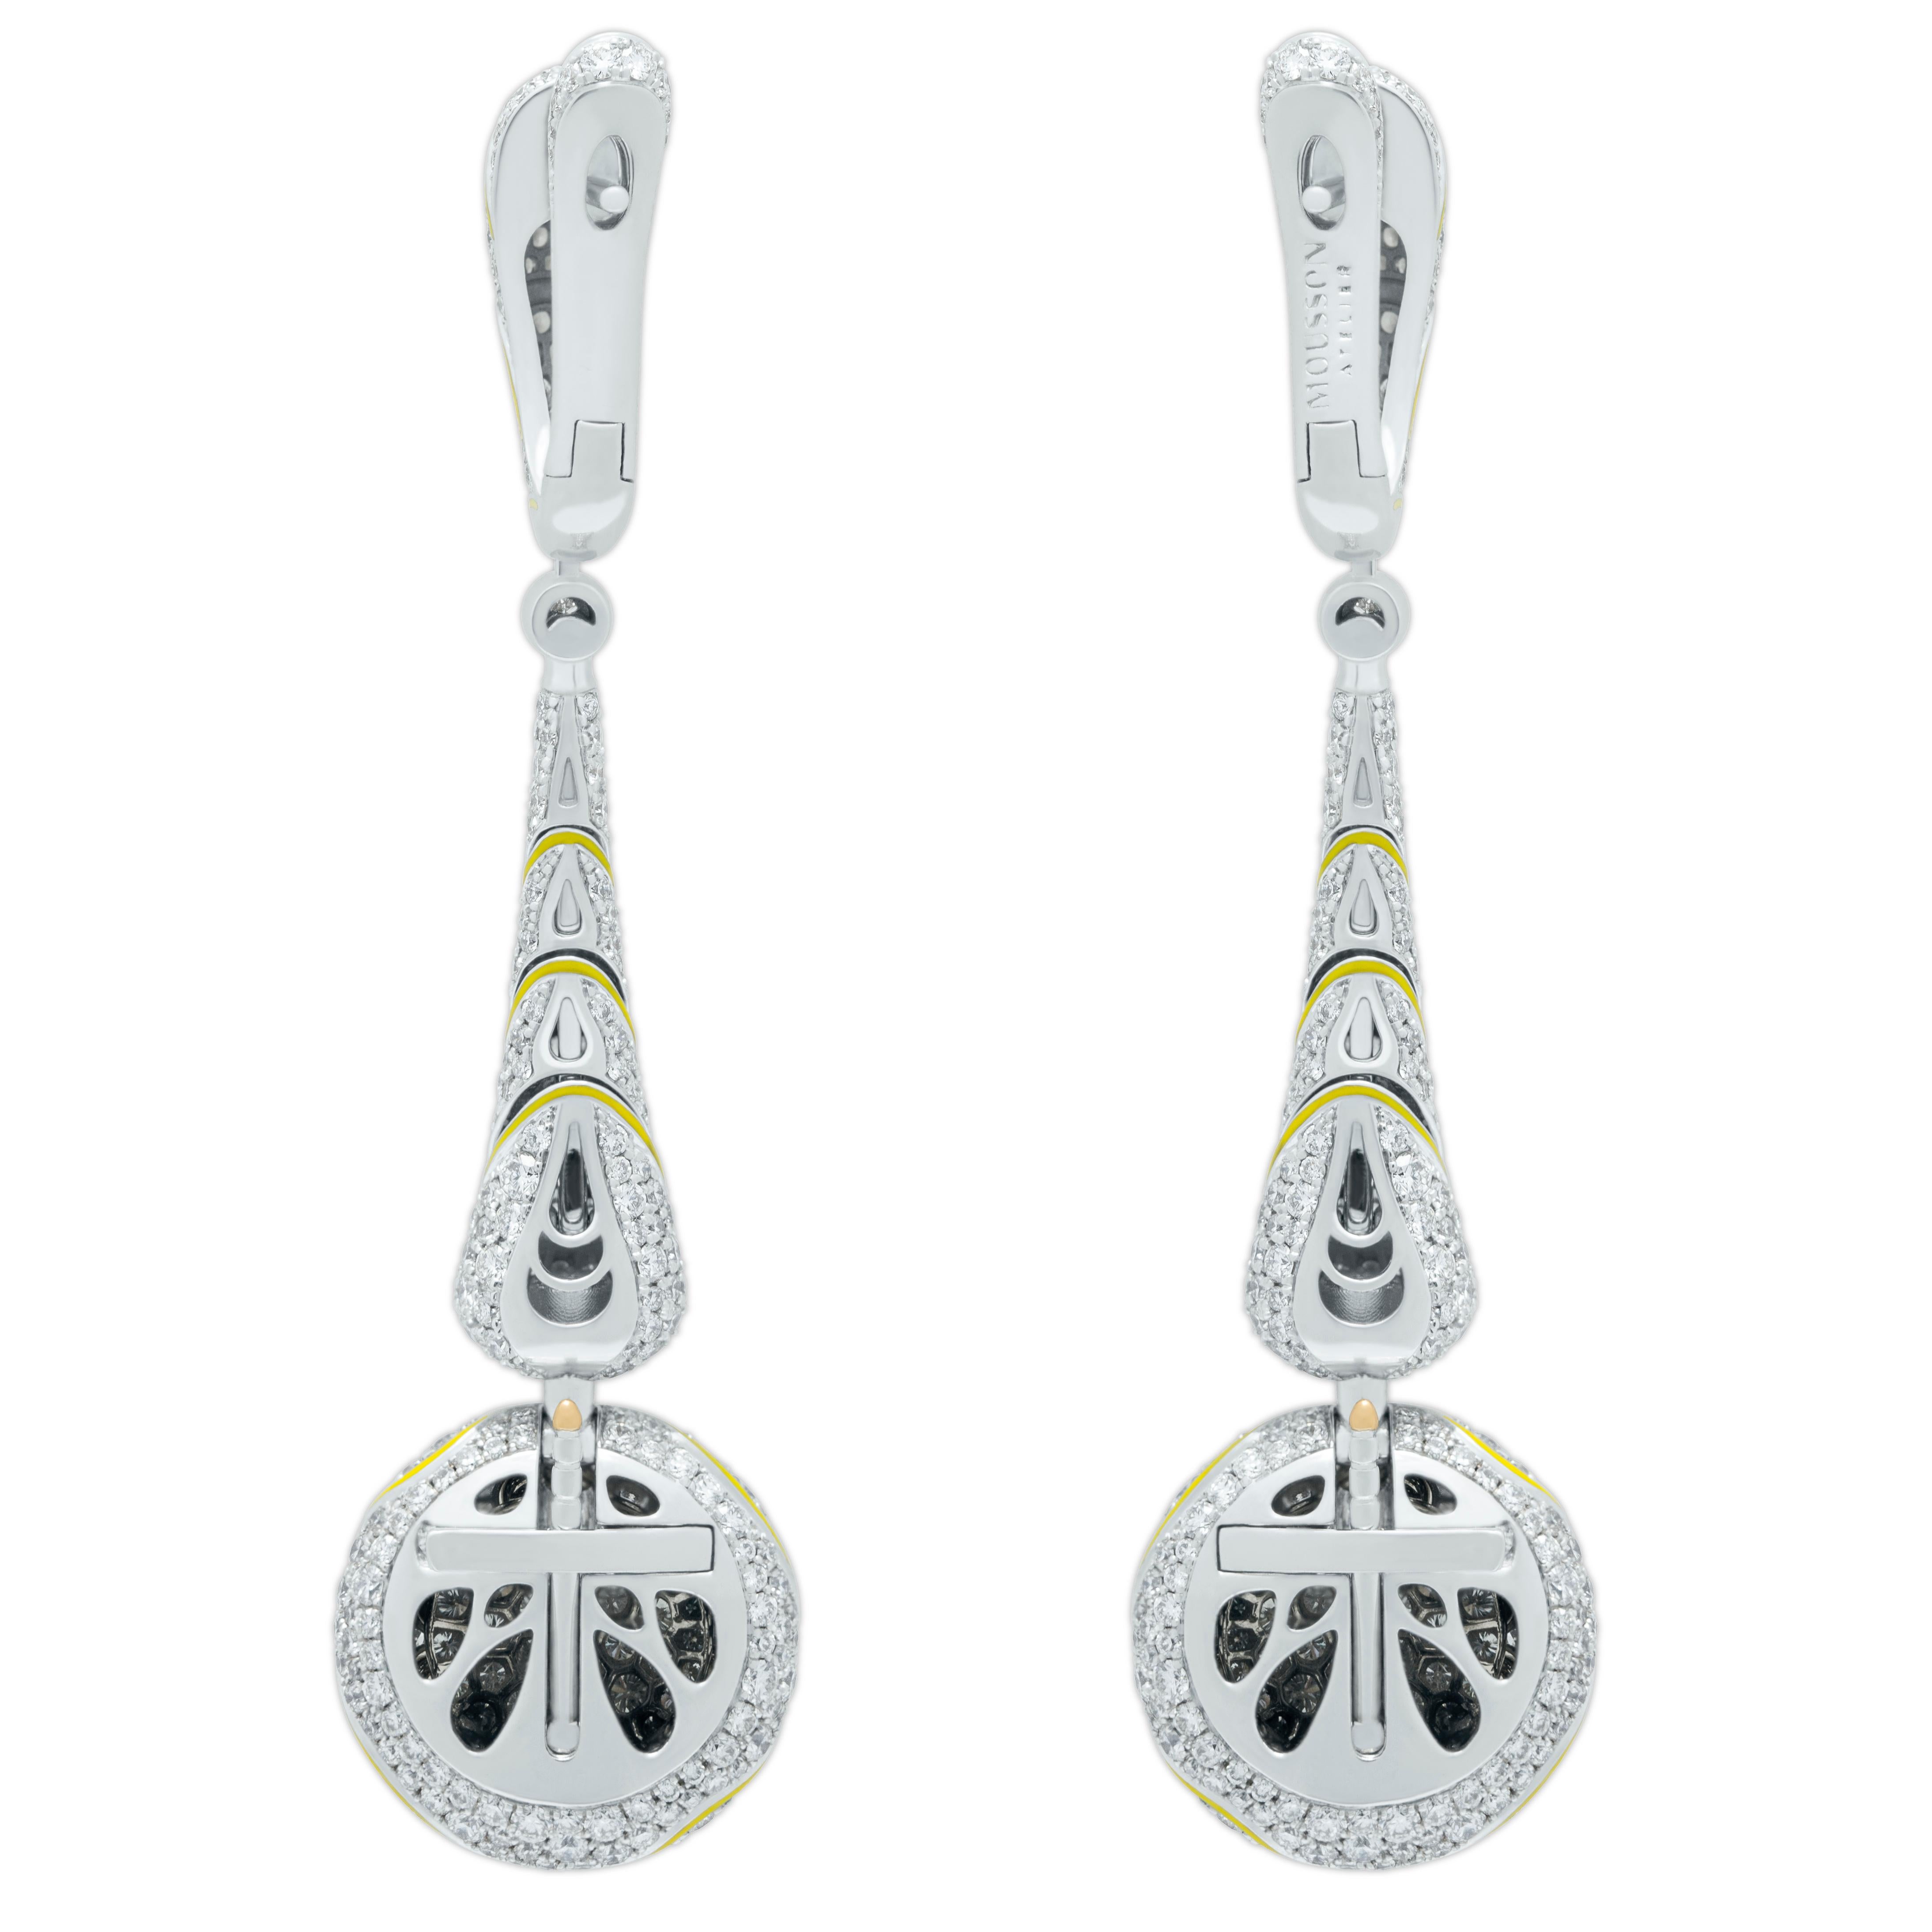 Yellow Diamonds White Diamonds Enamel 18 Karat White and Yellow Gold High Jewelry Earrings

Experience luxurious craftsmanship with these 18K White Gold earrings. Featuring 12 unique Pear and Oval shape Yellow Diamonds weighing 2.48 Carat with